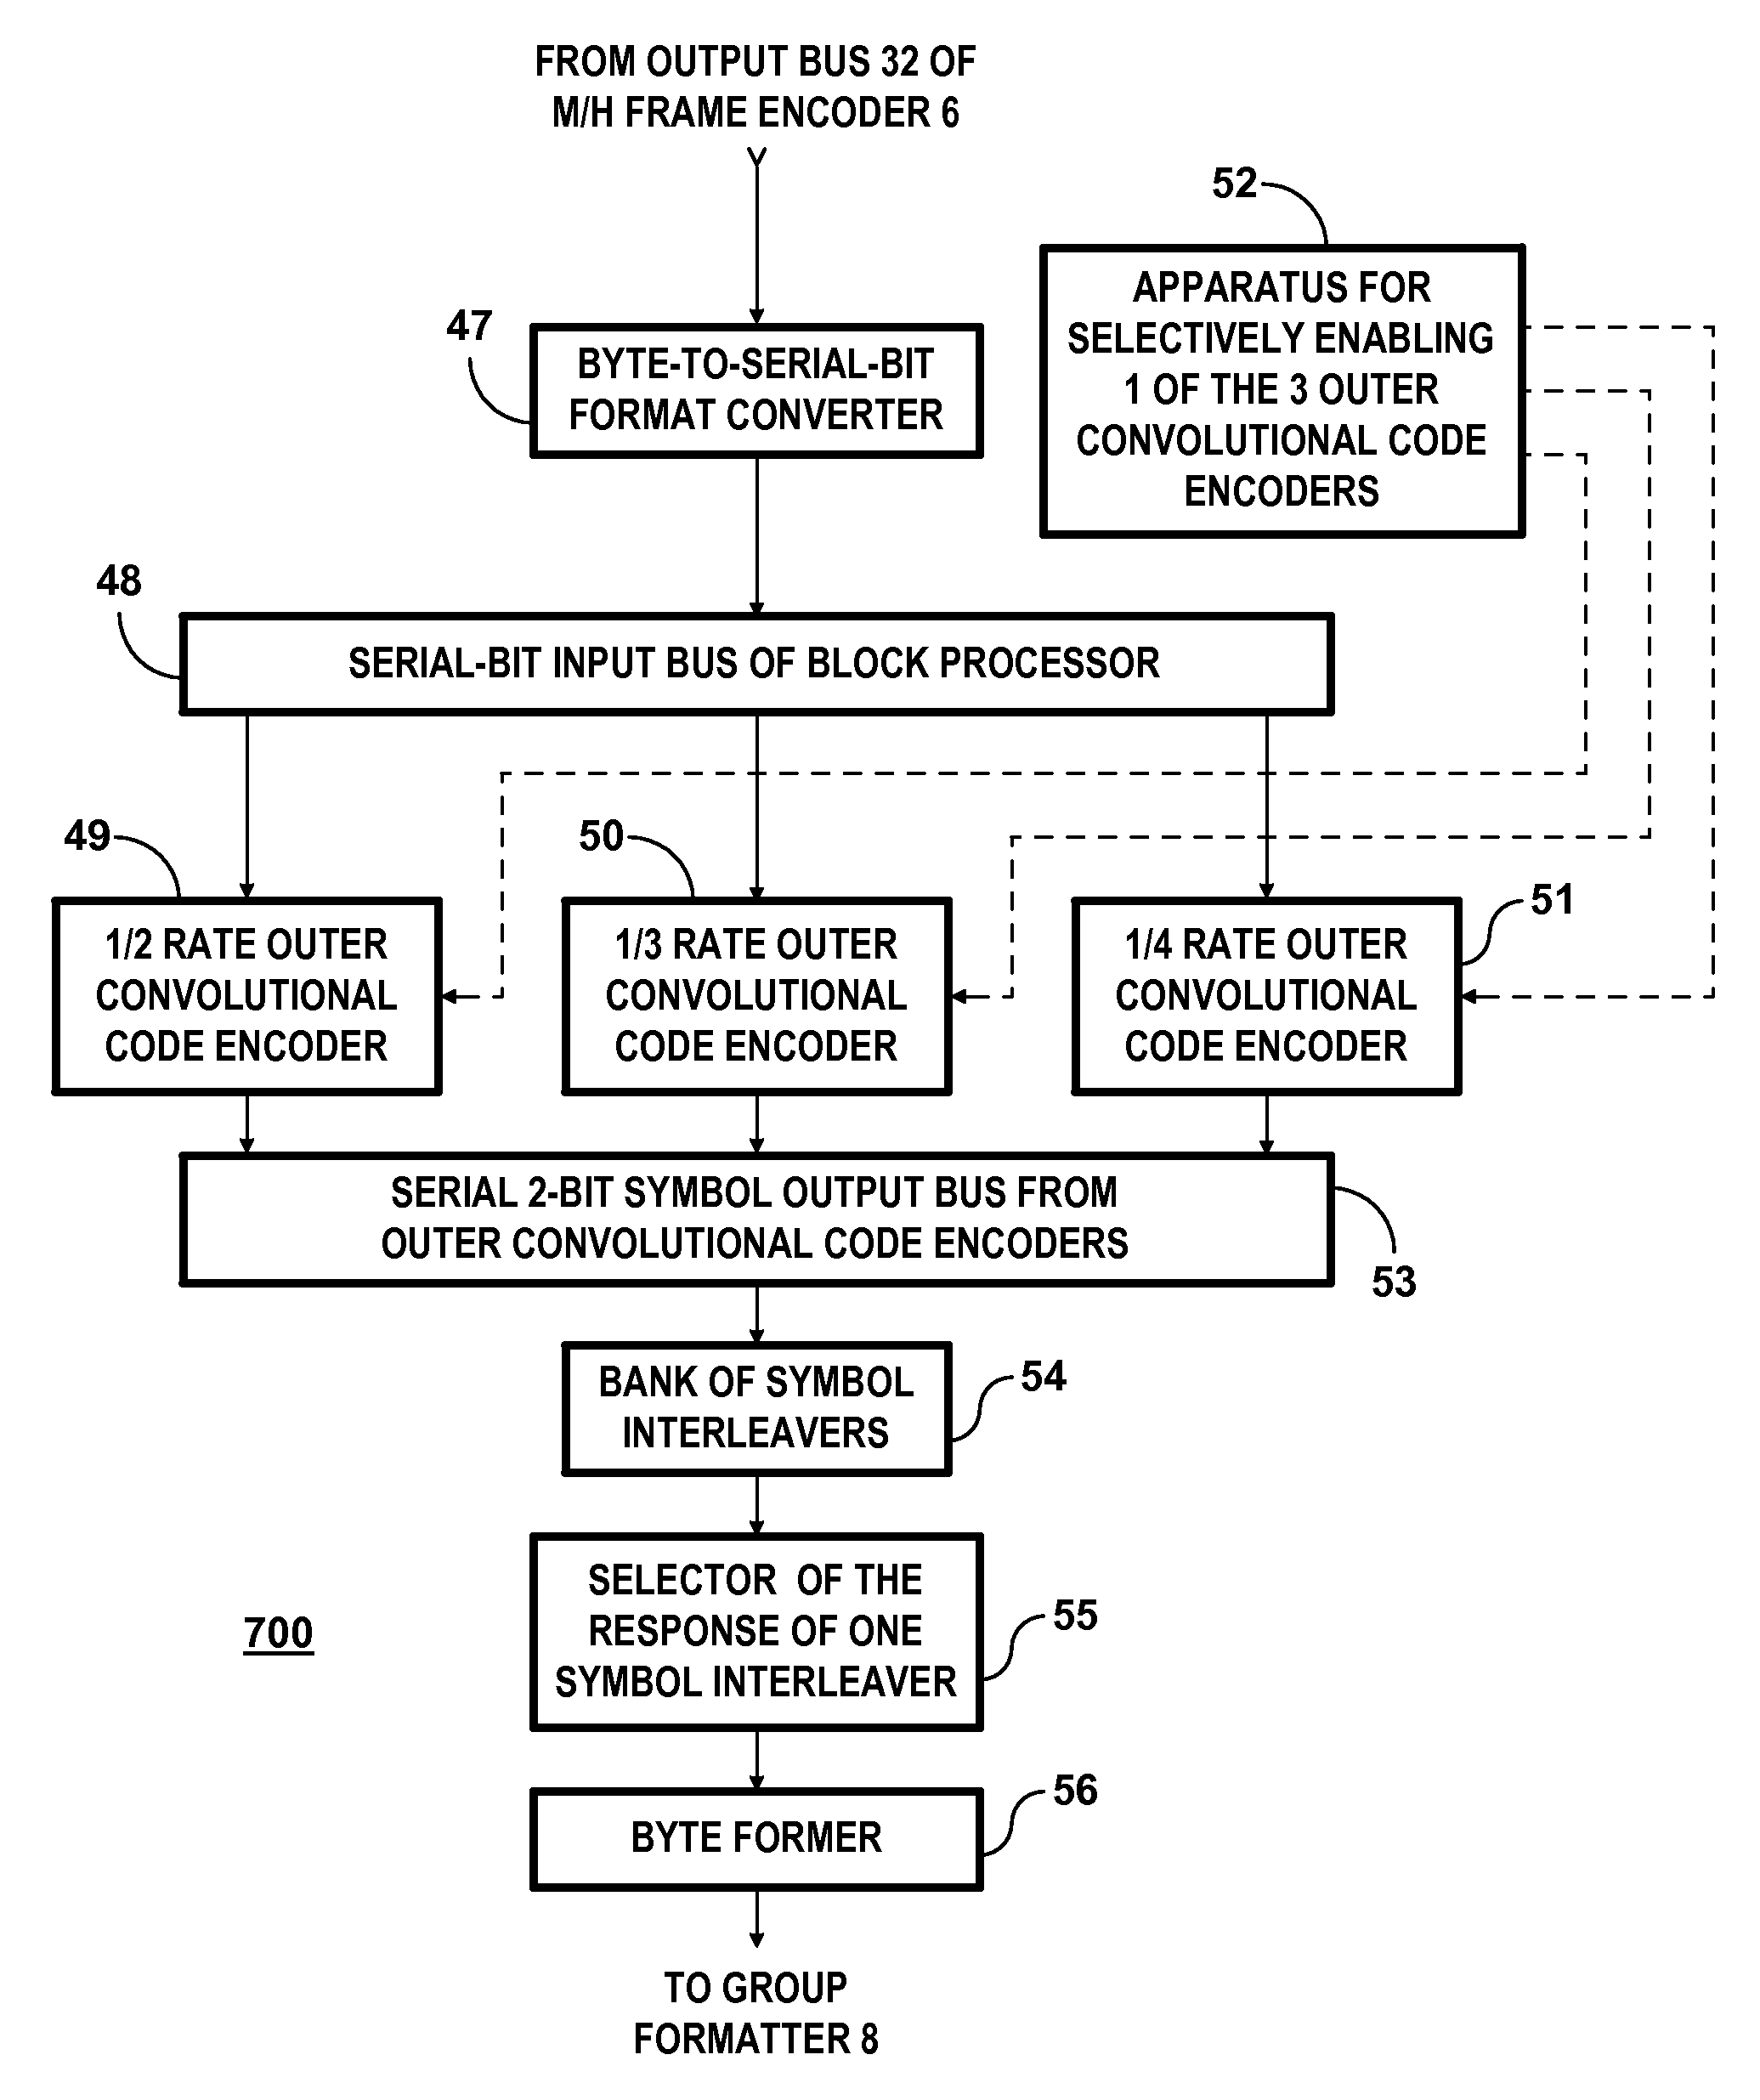 Sub-channel acquisition in a digital television receiver designed to receive mobile/handheld signals